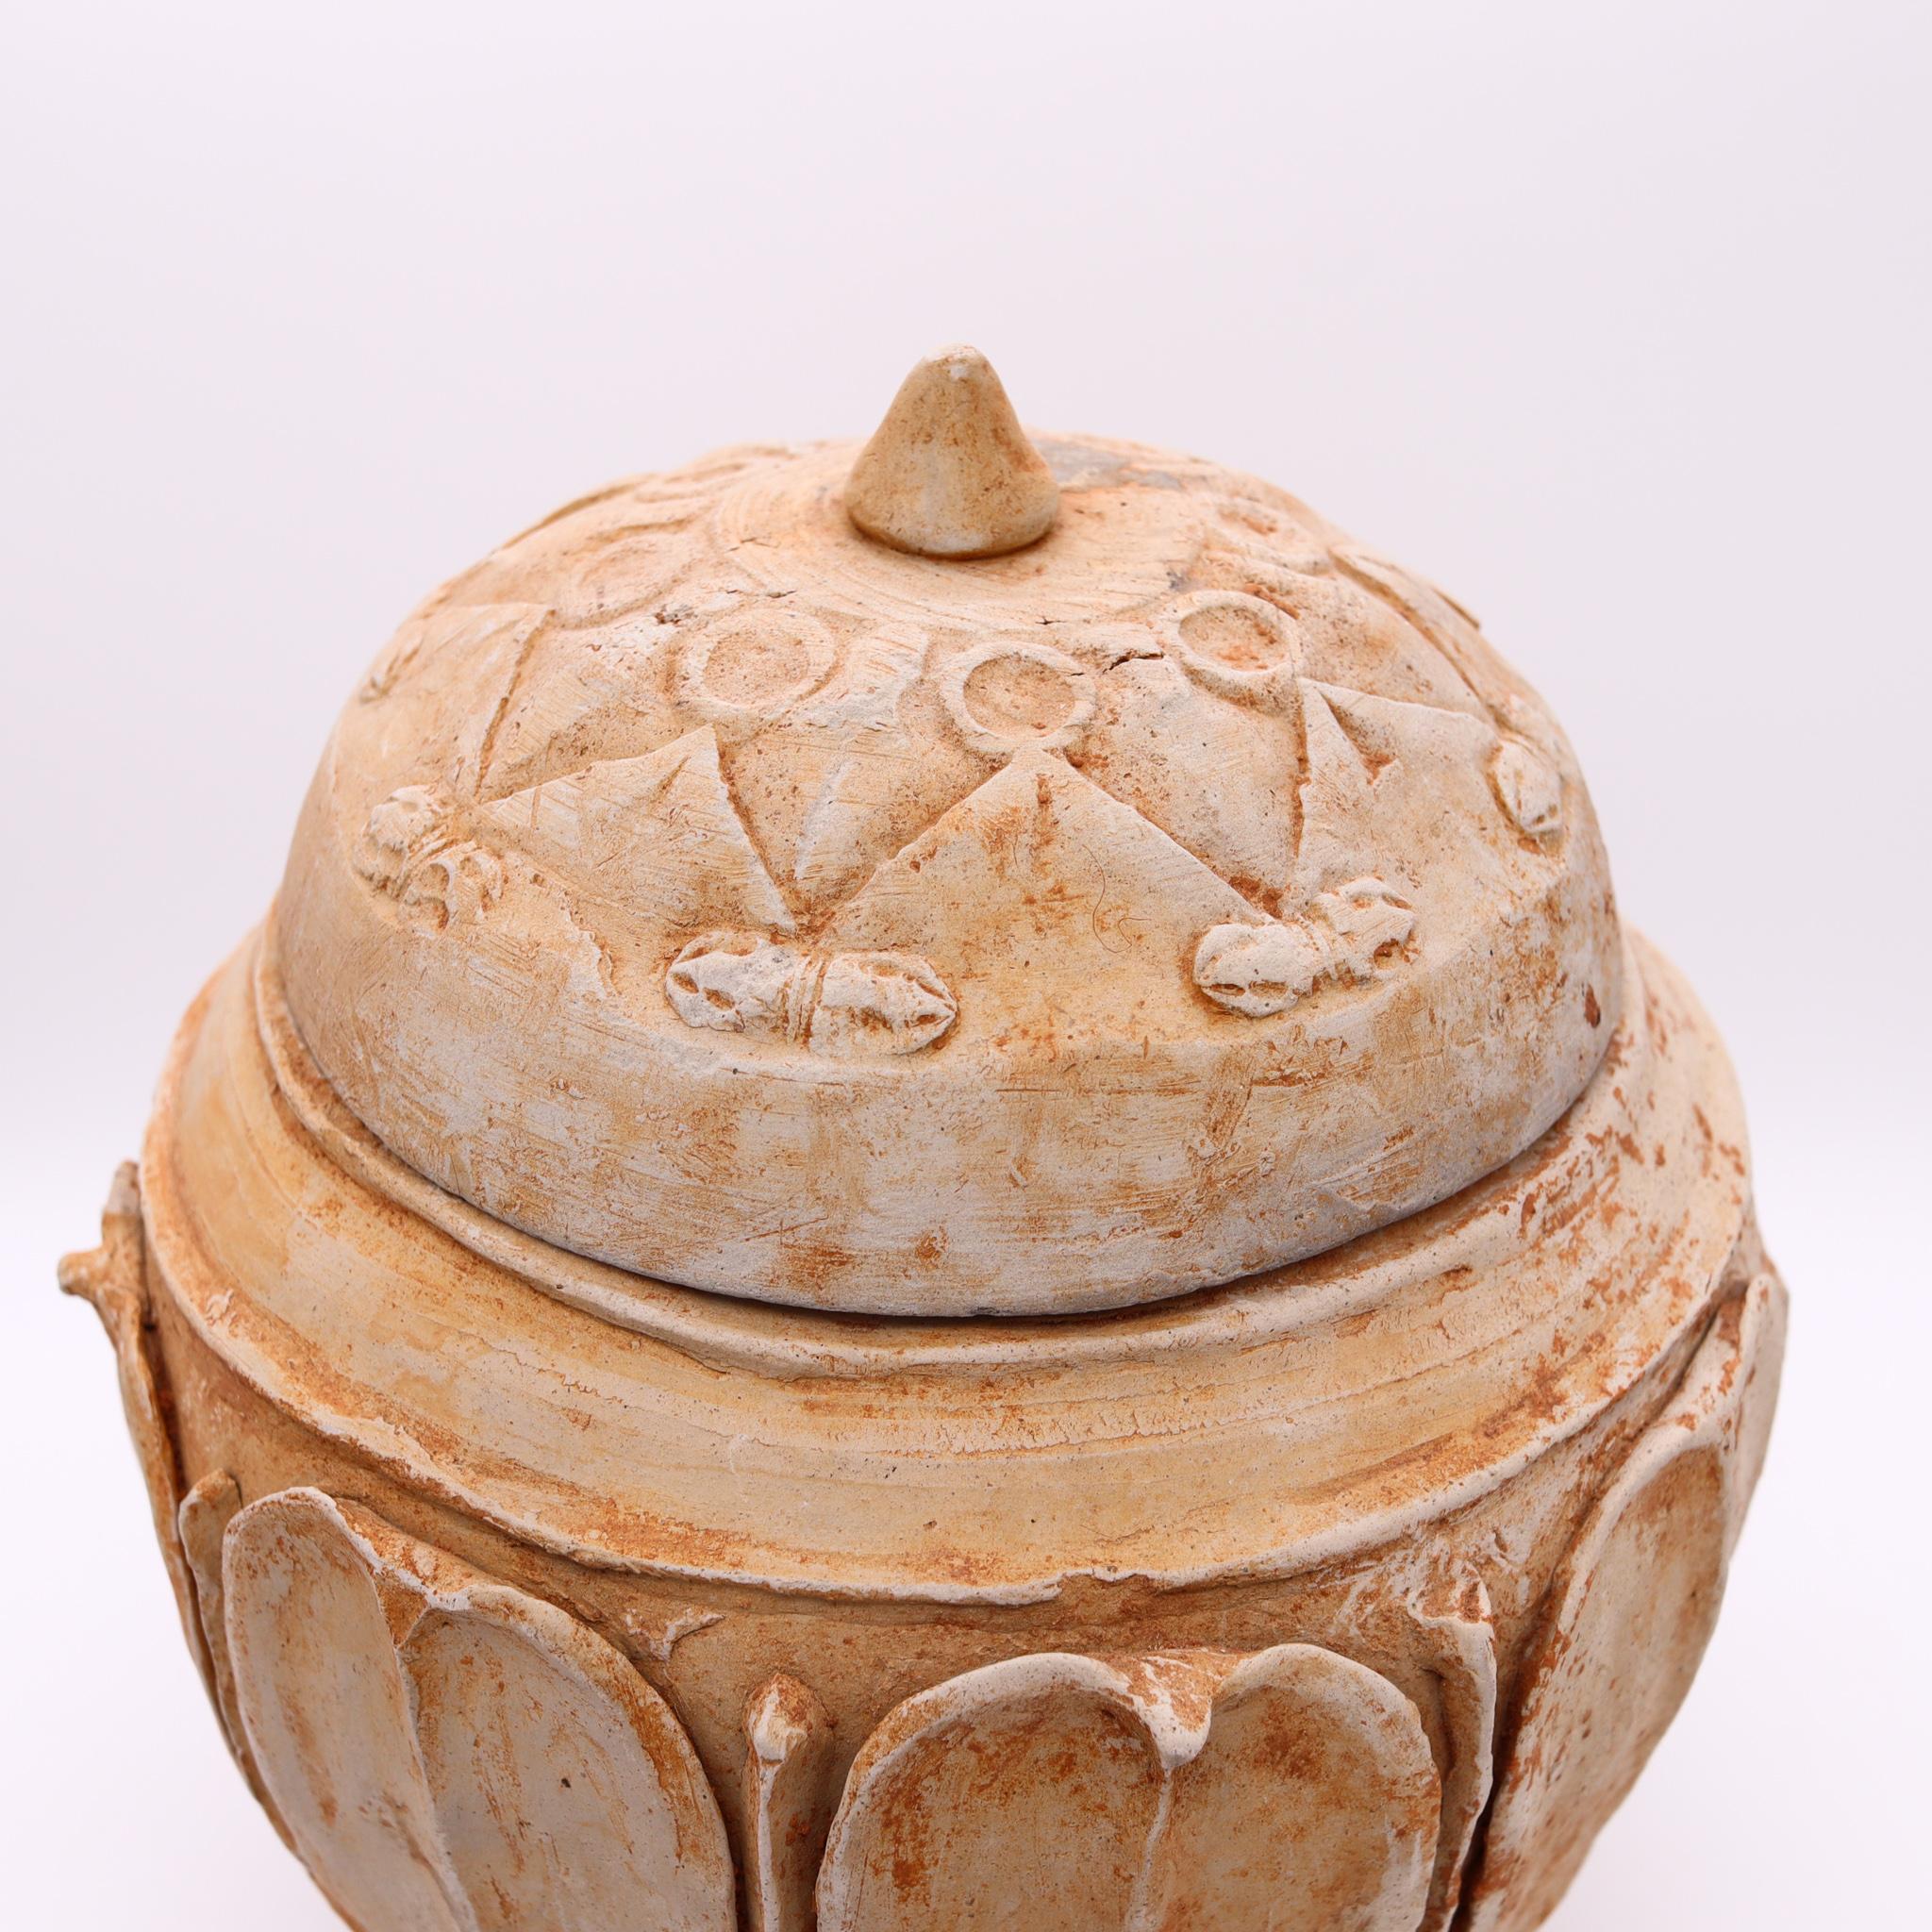 18th Century and Earlier China 618-907 AD Tang Dynasty Offering Vessel With 8 Lotus Petals in Earthenware For Sale